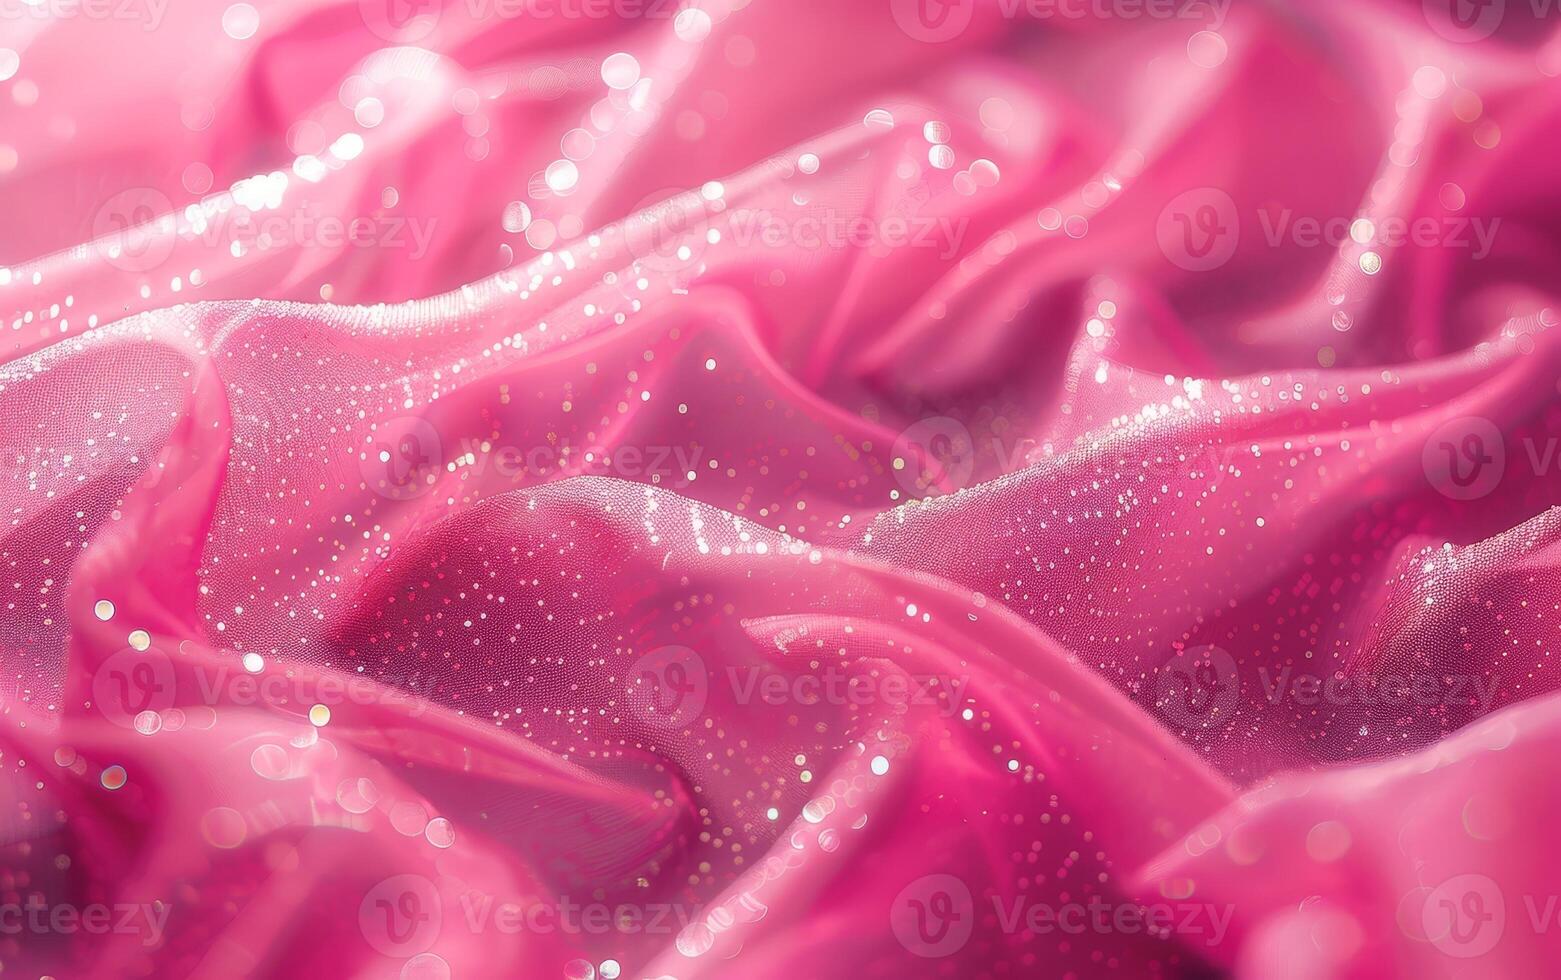 A pink fabric with glitter on it photo